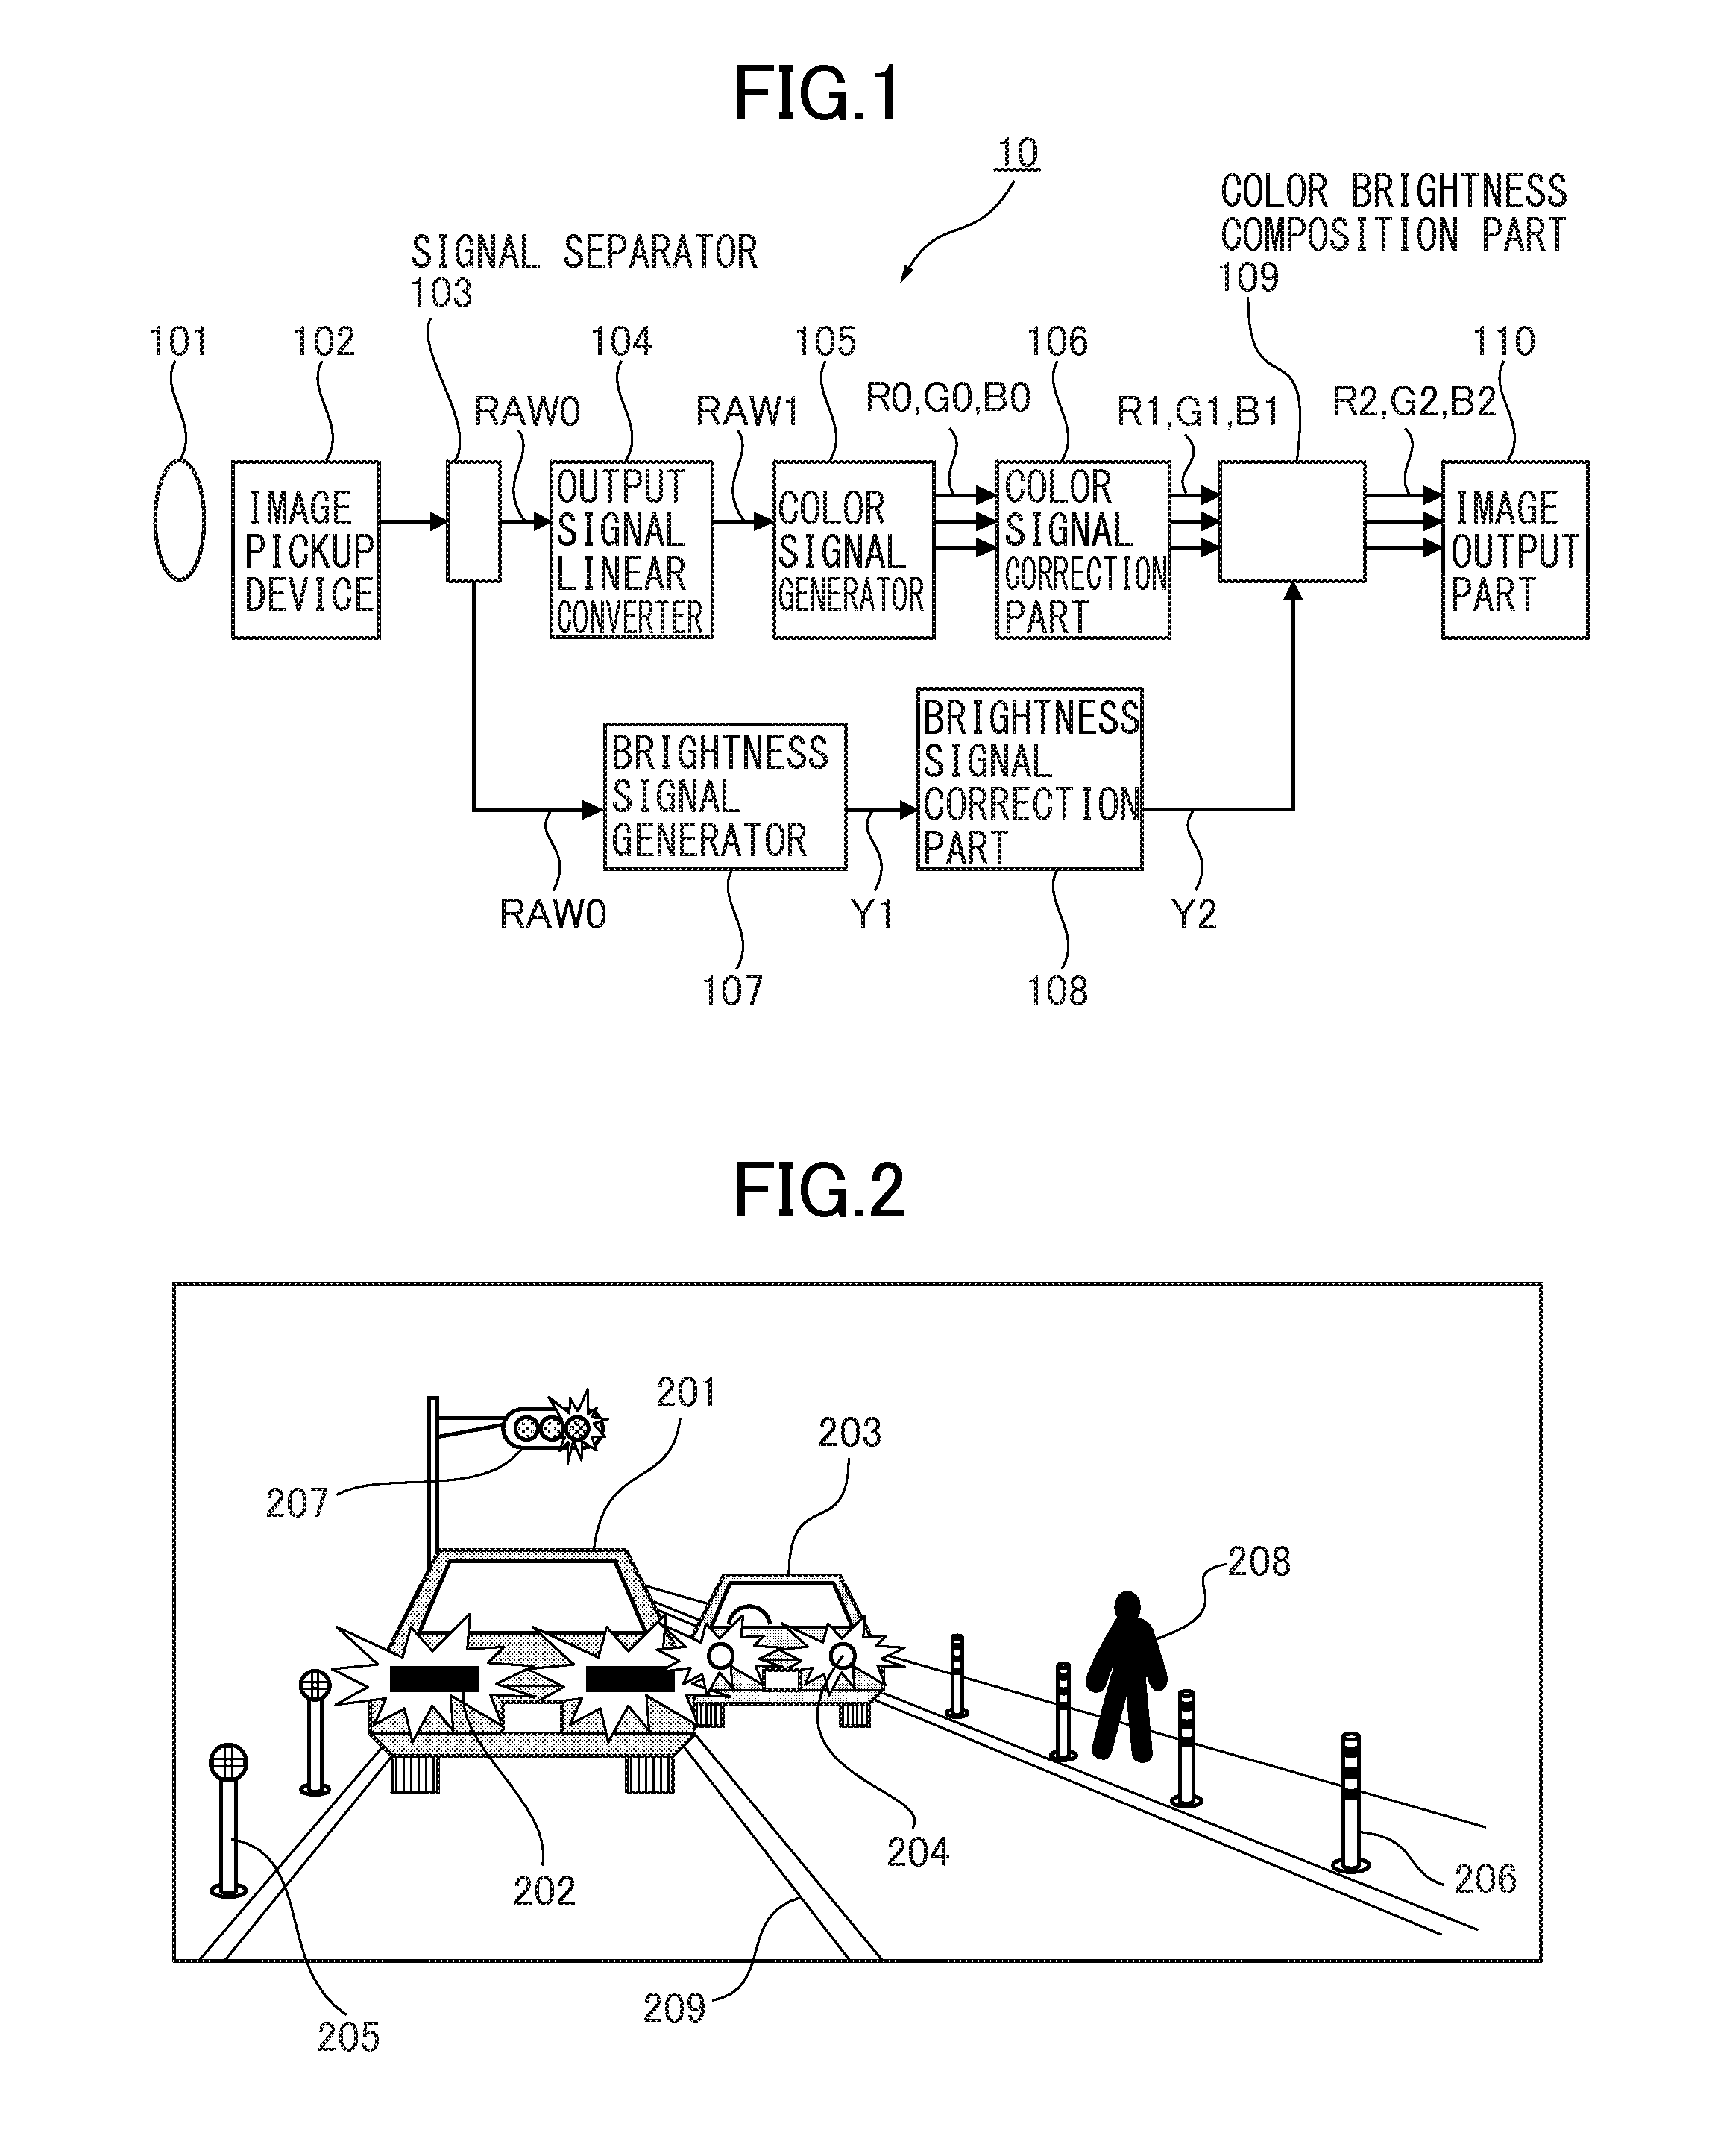 Imaging apparatus capable of generating an appropriate color image